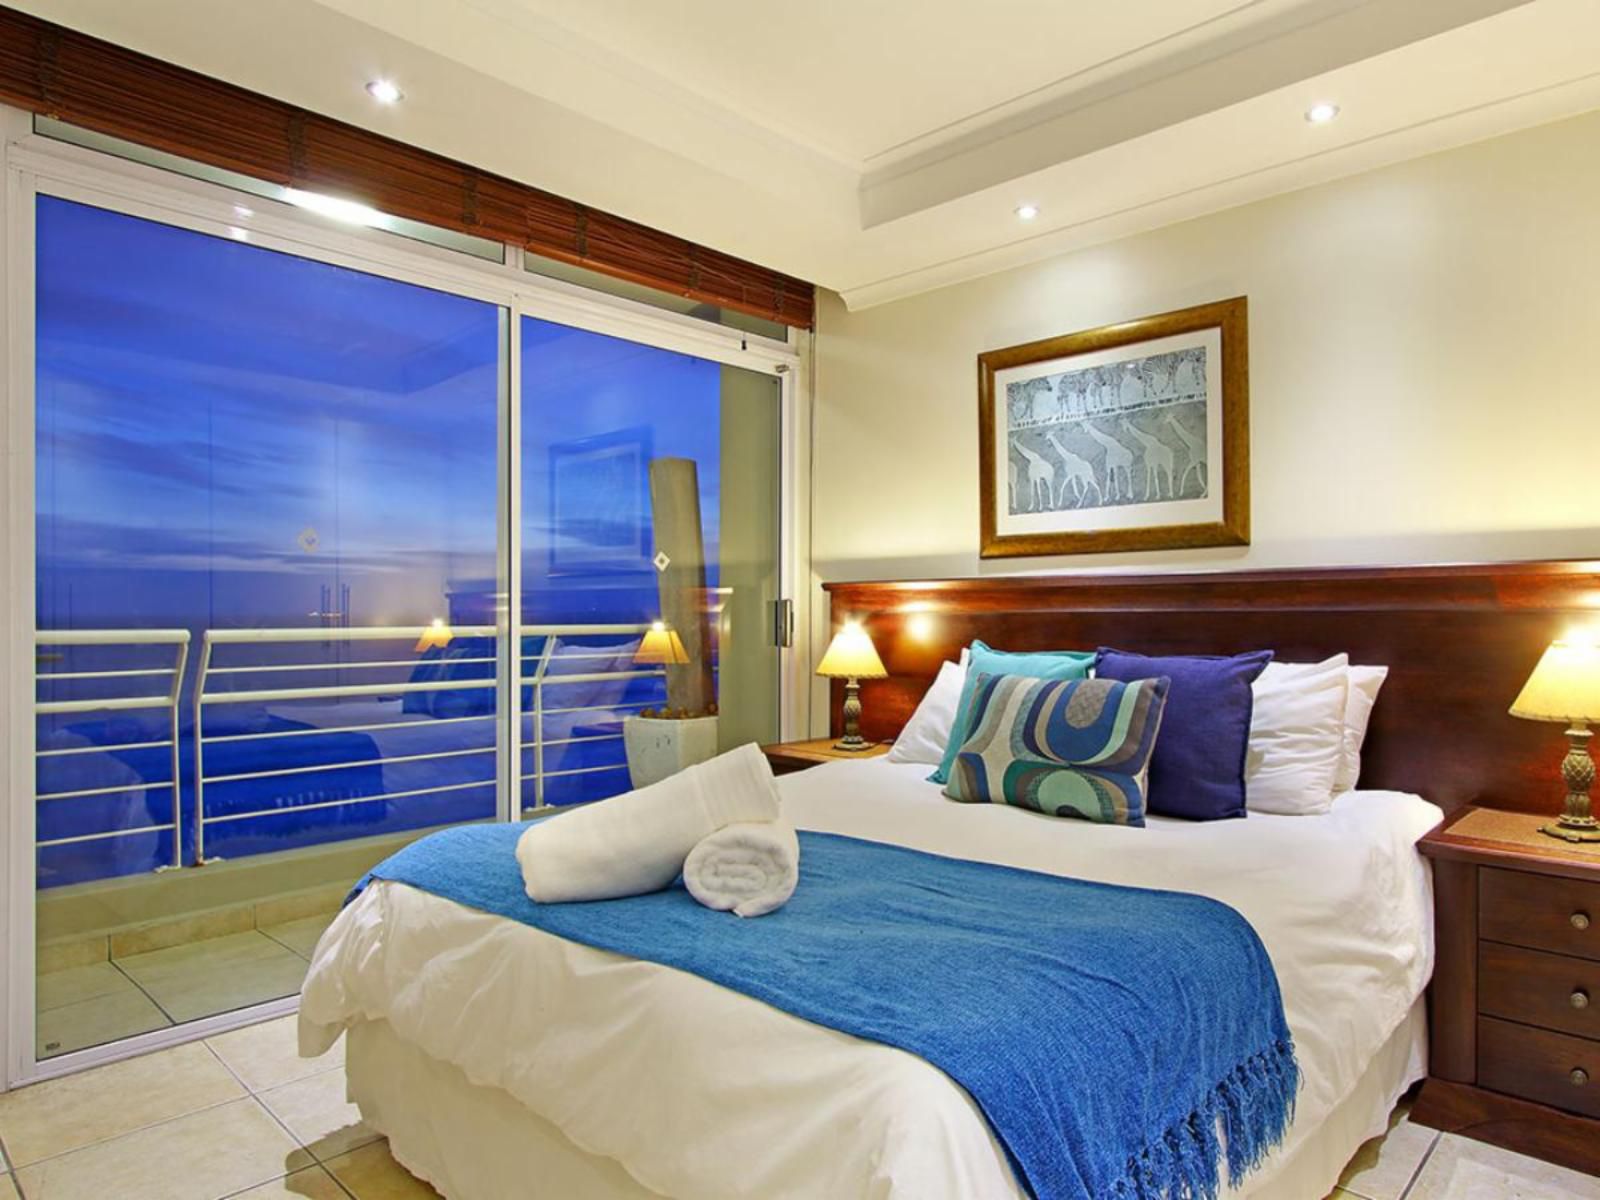 Ocean View C602 By Hostagents Bloubergstrand Blouberg Western Cape South Africa Complementary Colors